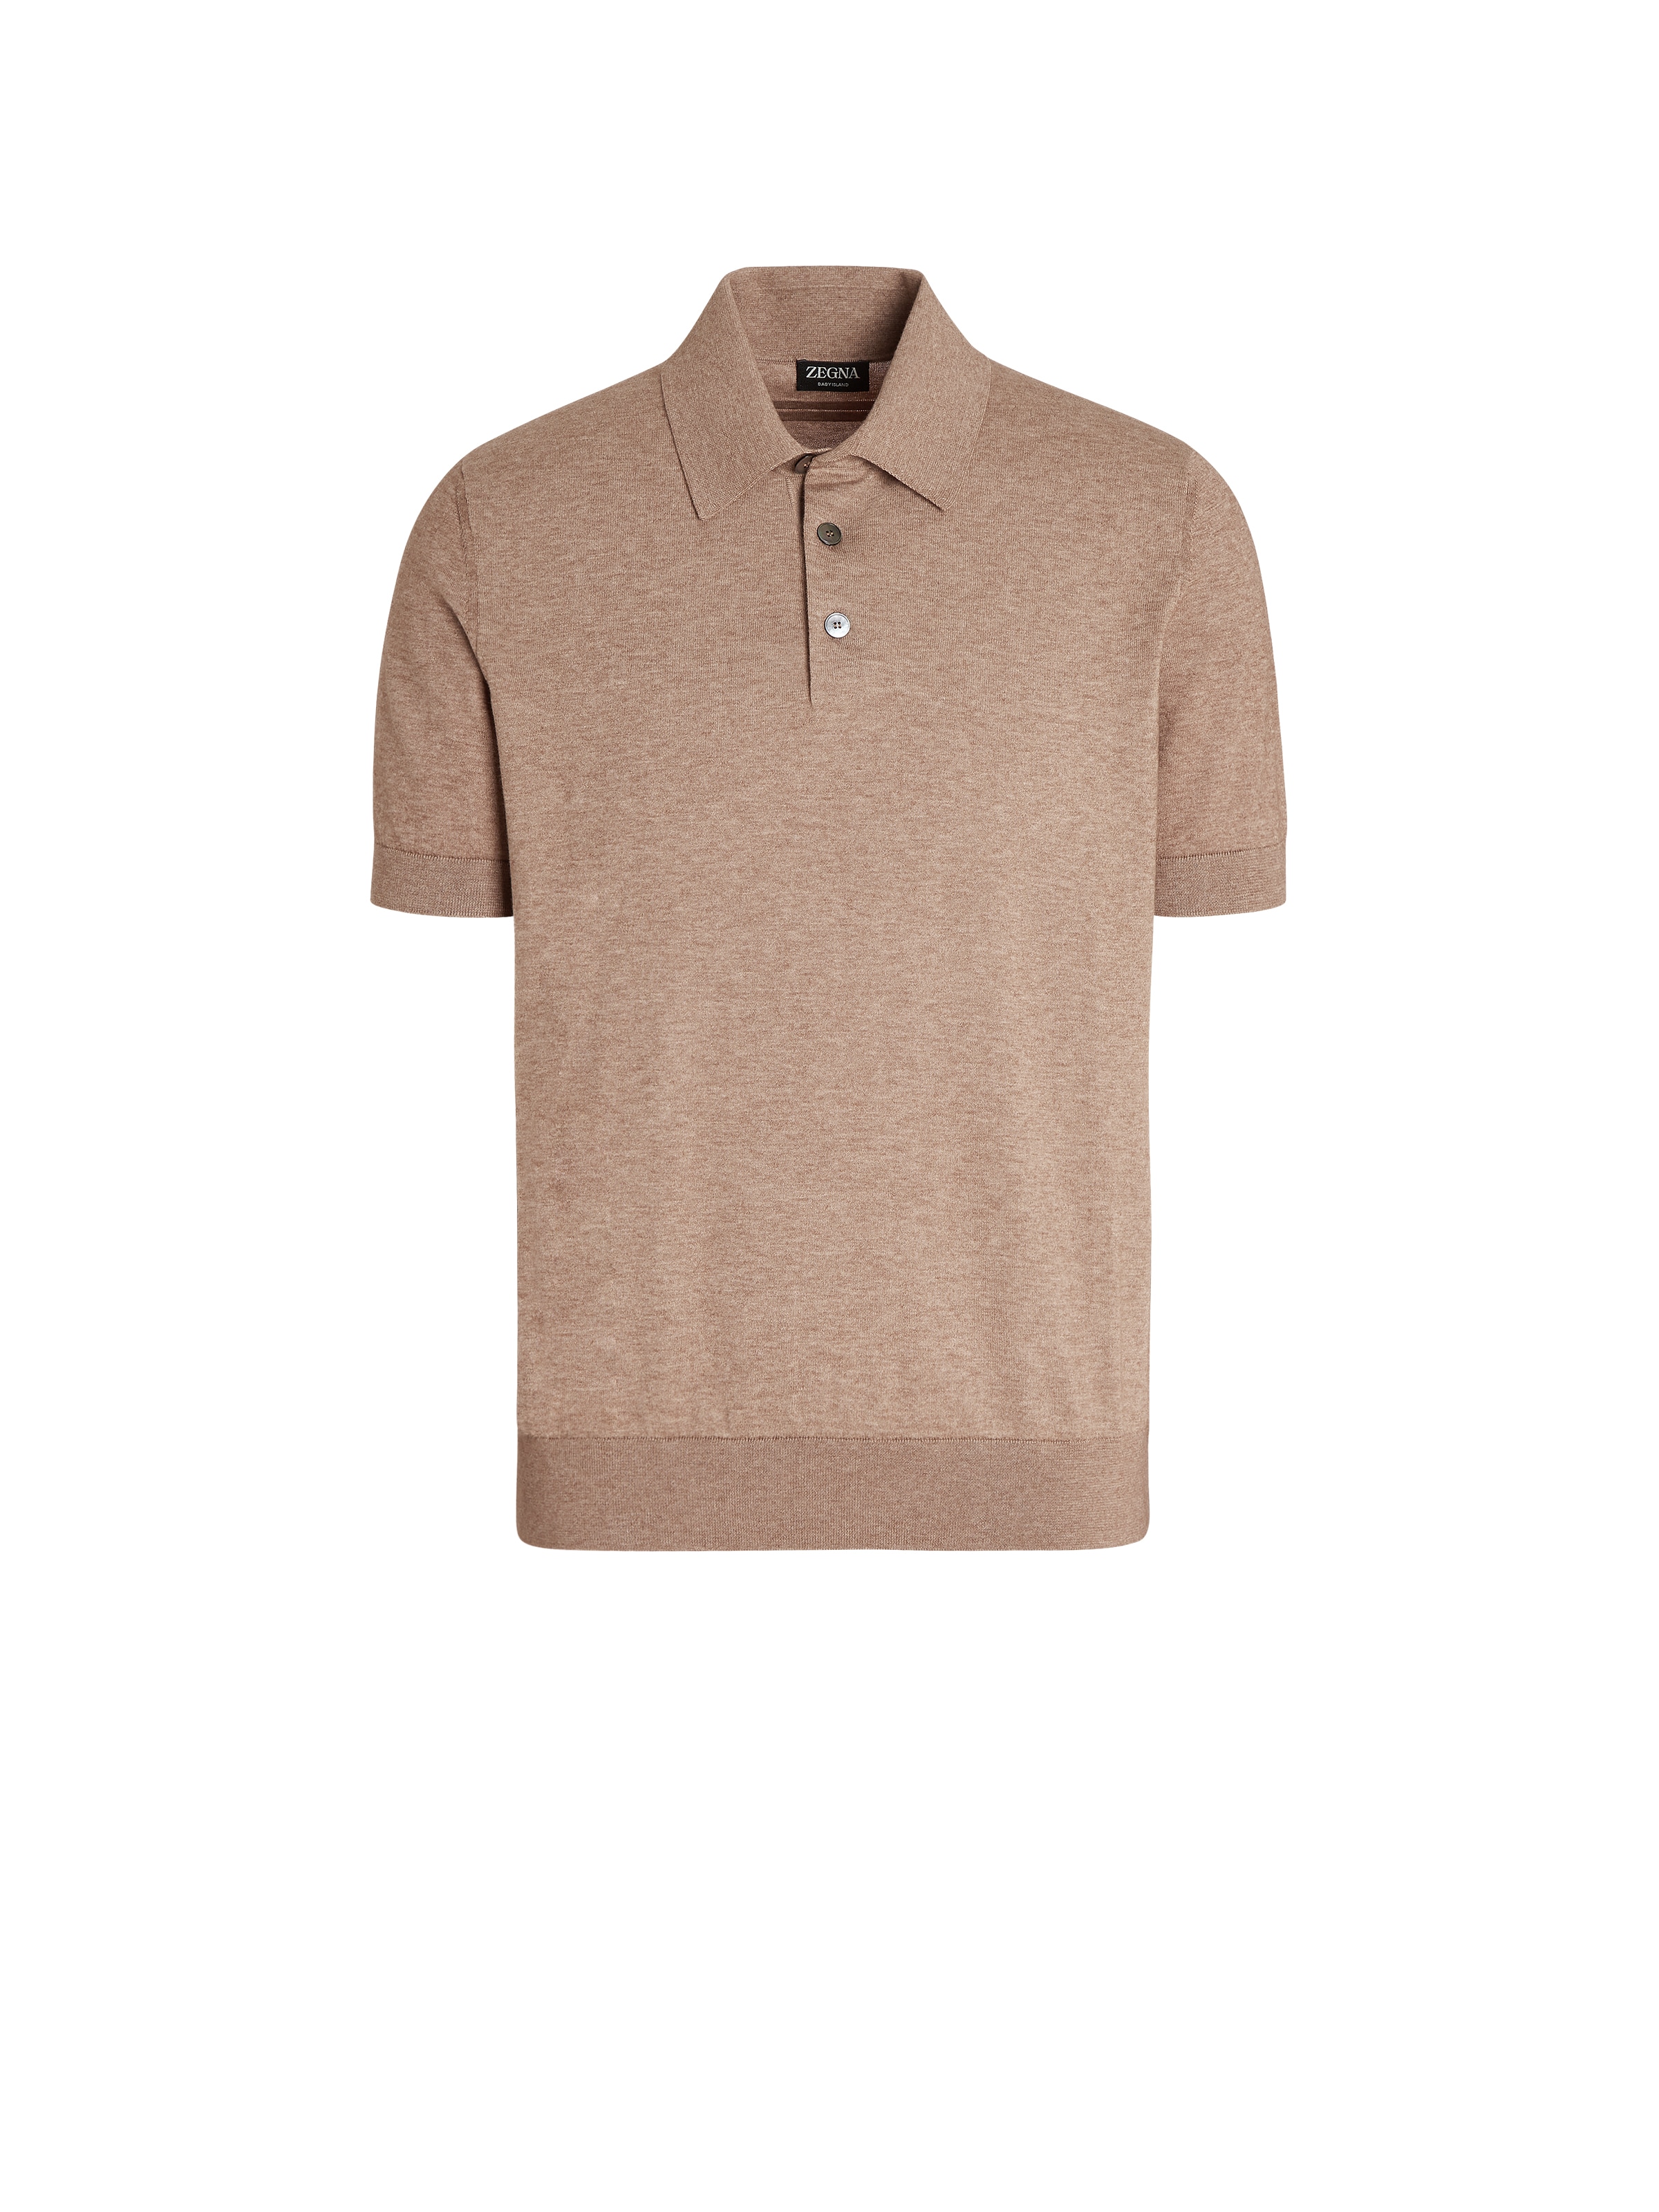 ZEGNA CAMEL BABY ISLAND COTTON AND CASHMERE KNIT SHORT-SLEEVE POLO